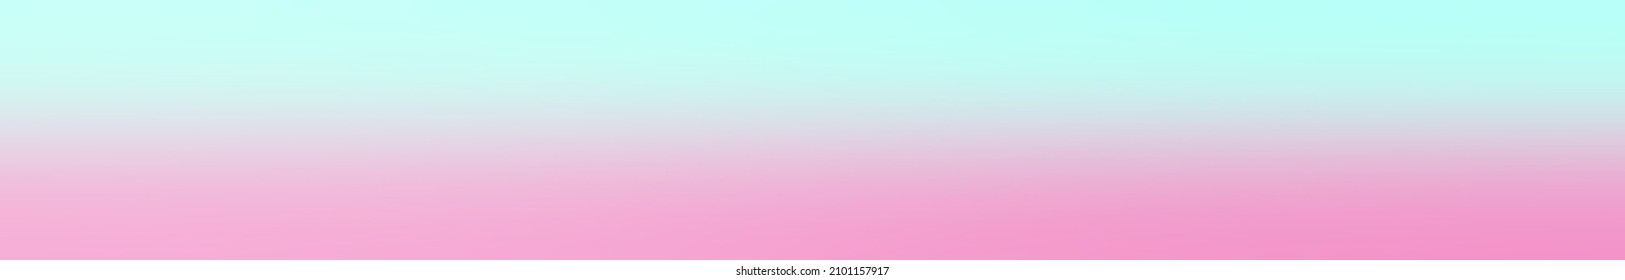 Blank blurred background gradient photo effect with light blue and amaranth pink color.